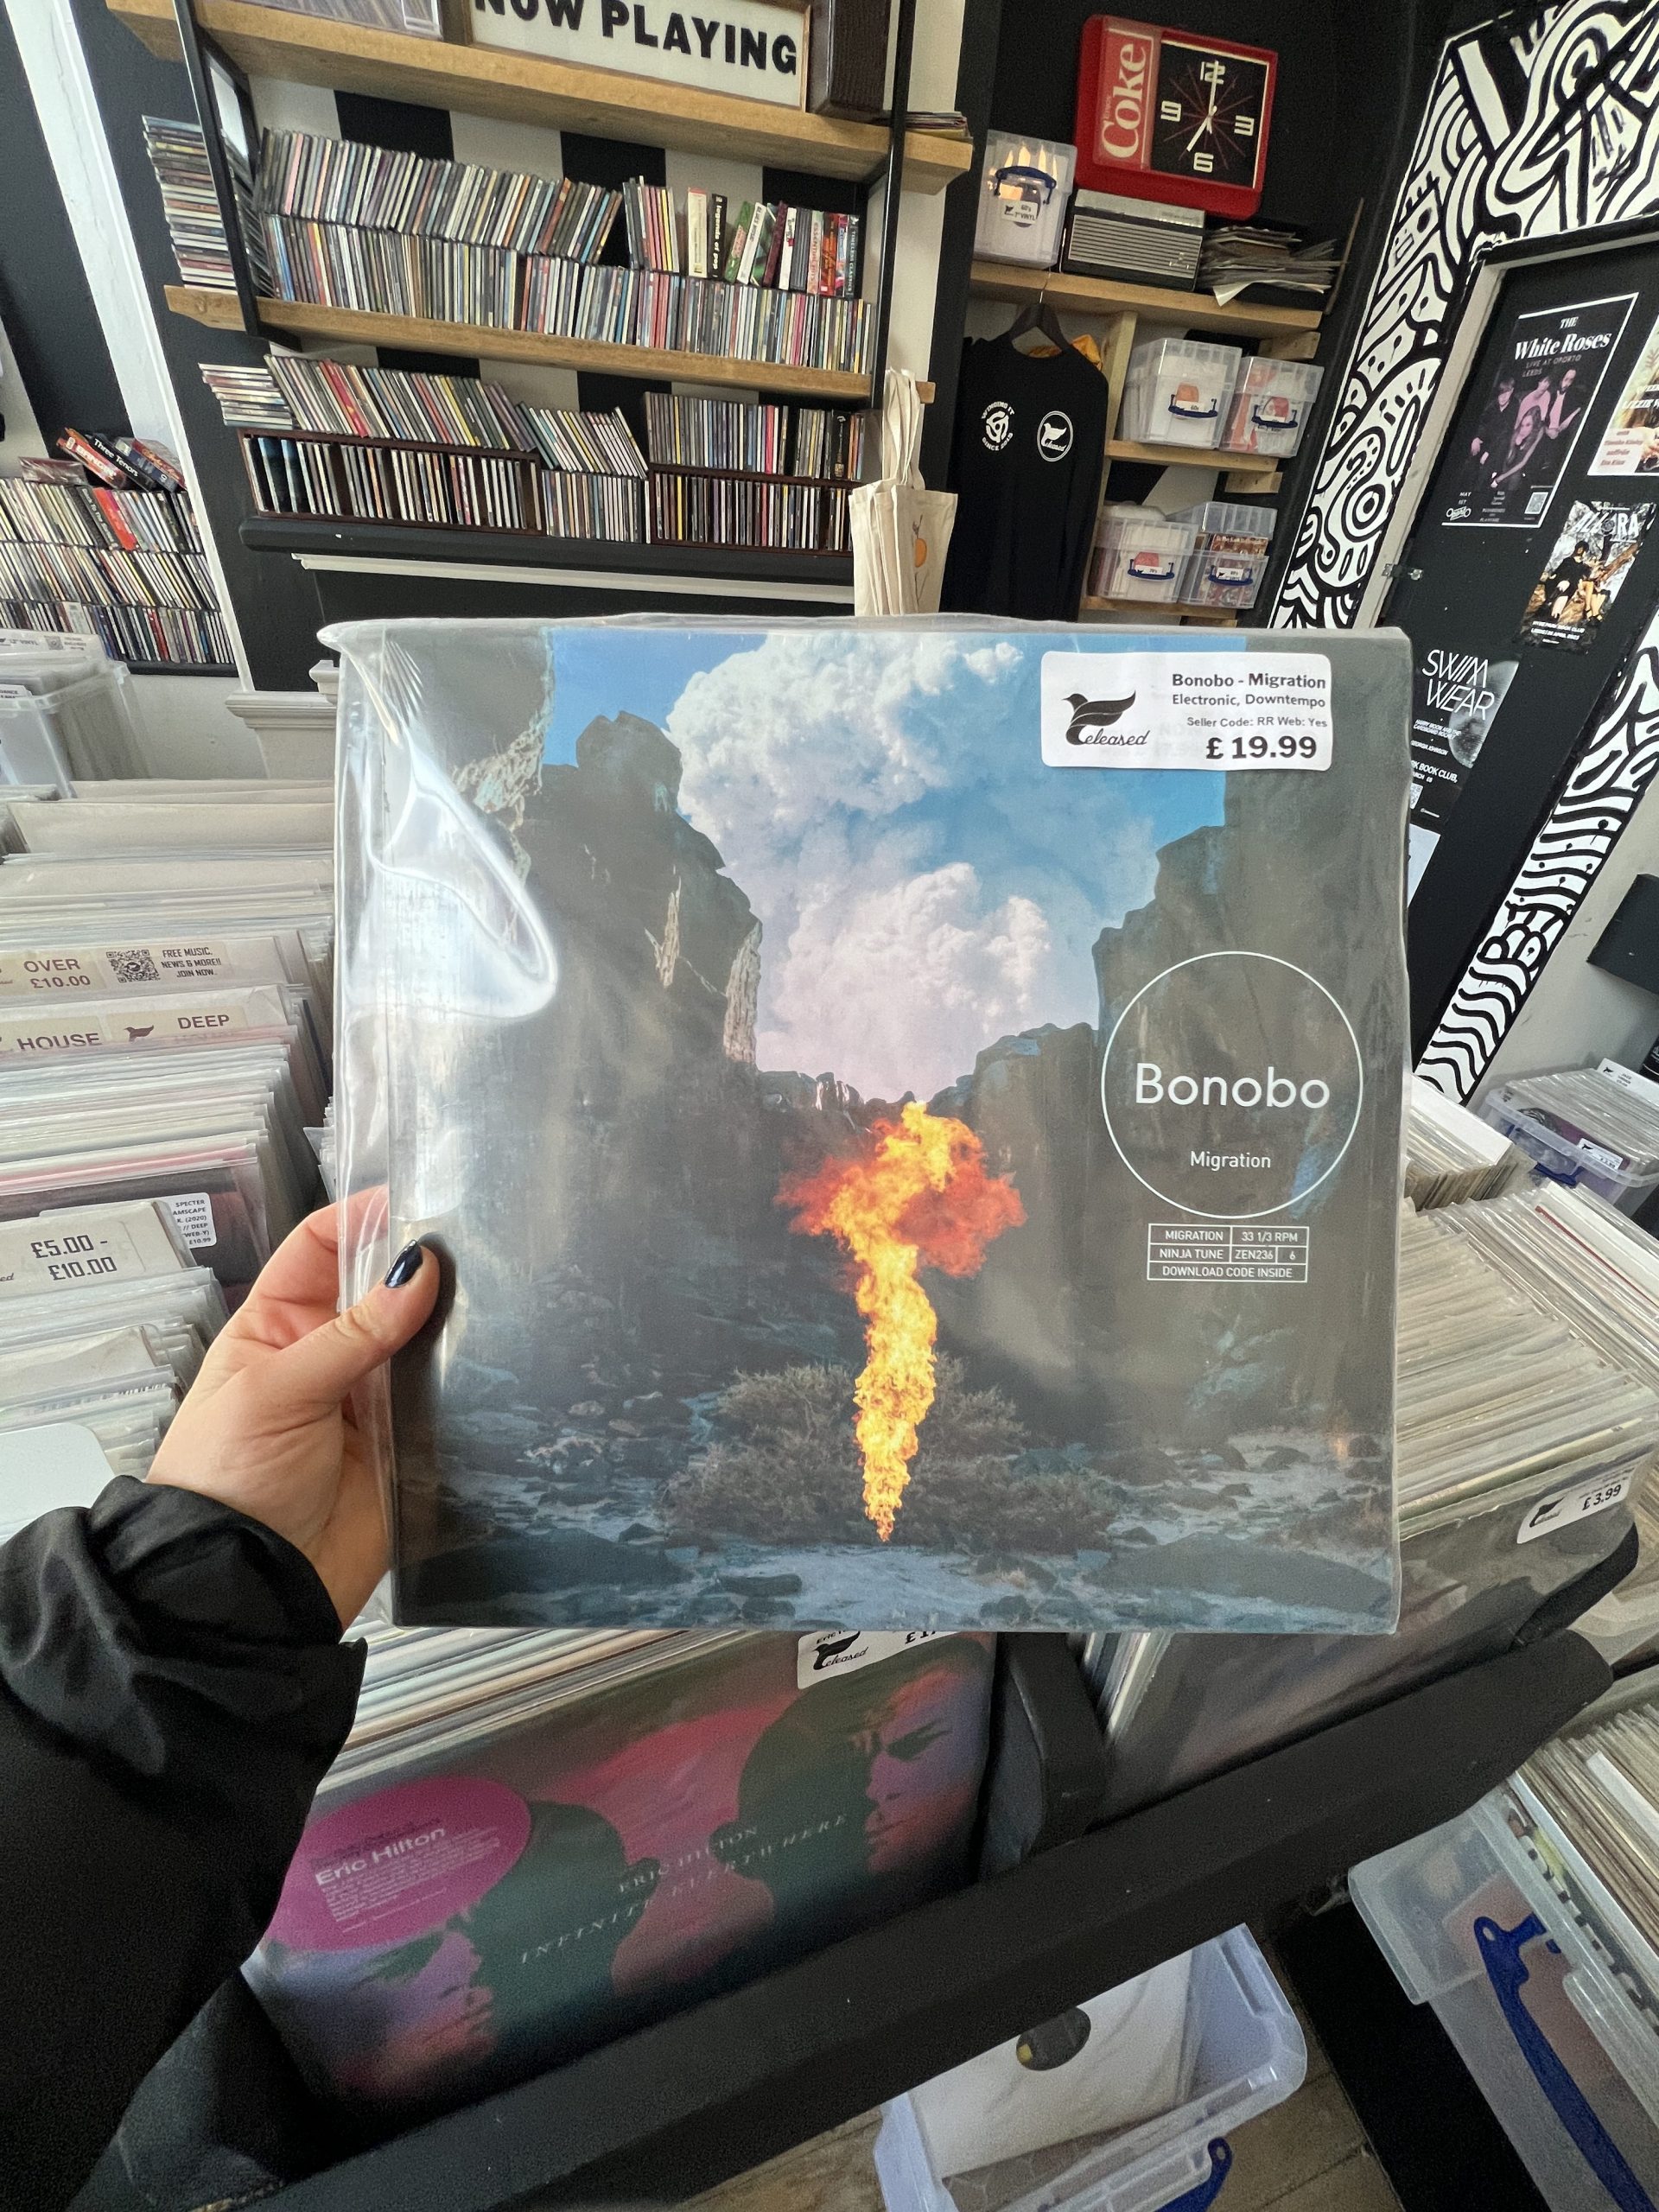 Bonobo record held up next to other records.